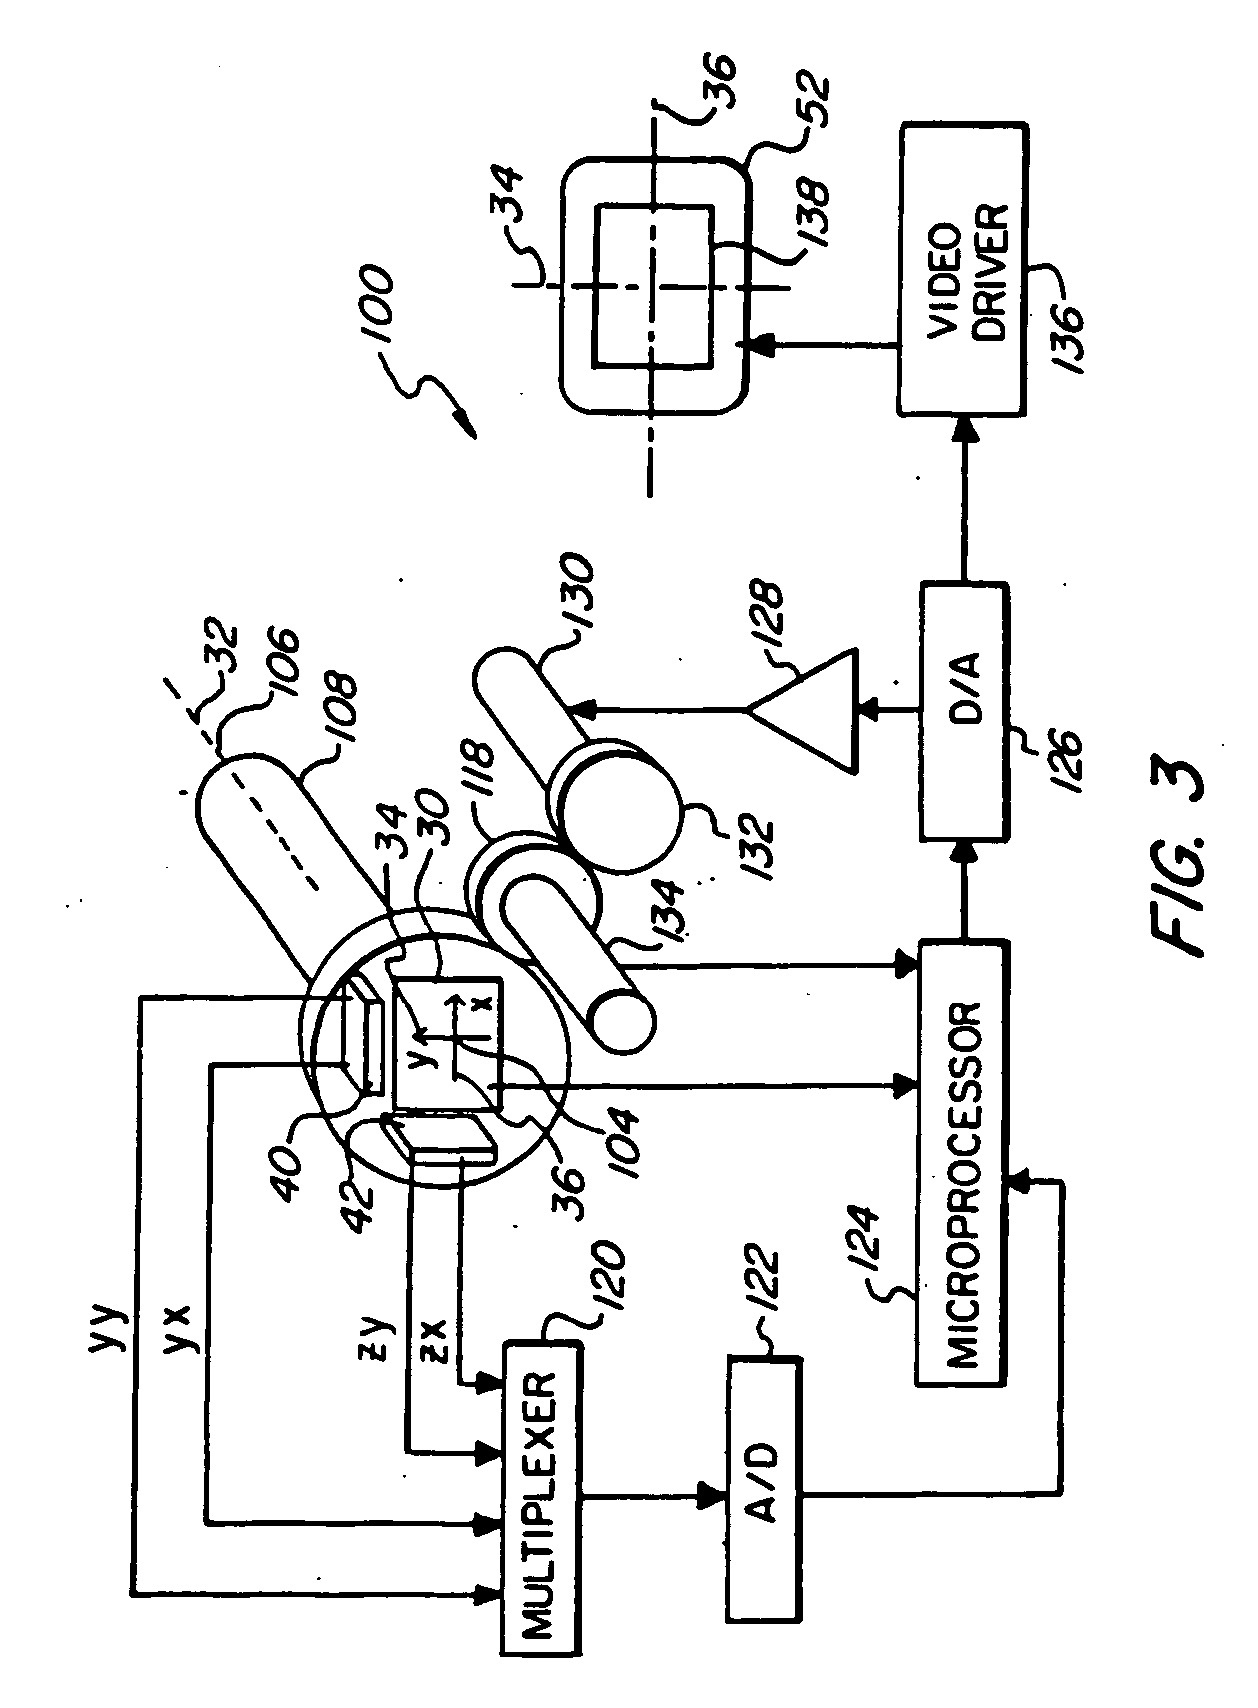 Image orientation for endoscopic video displays